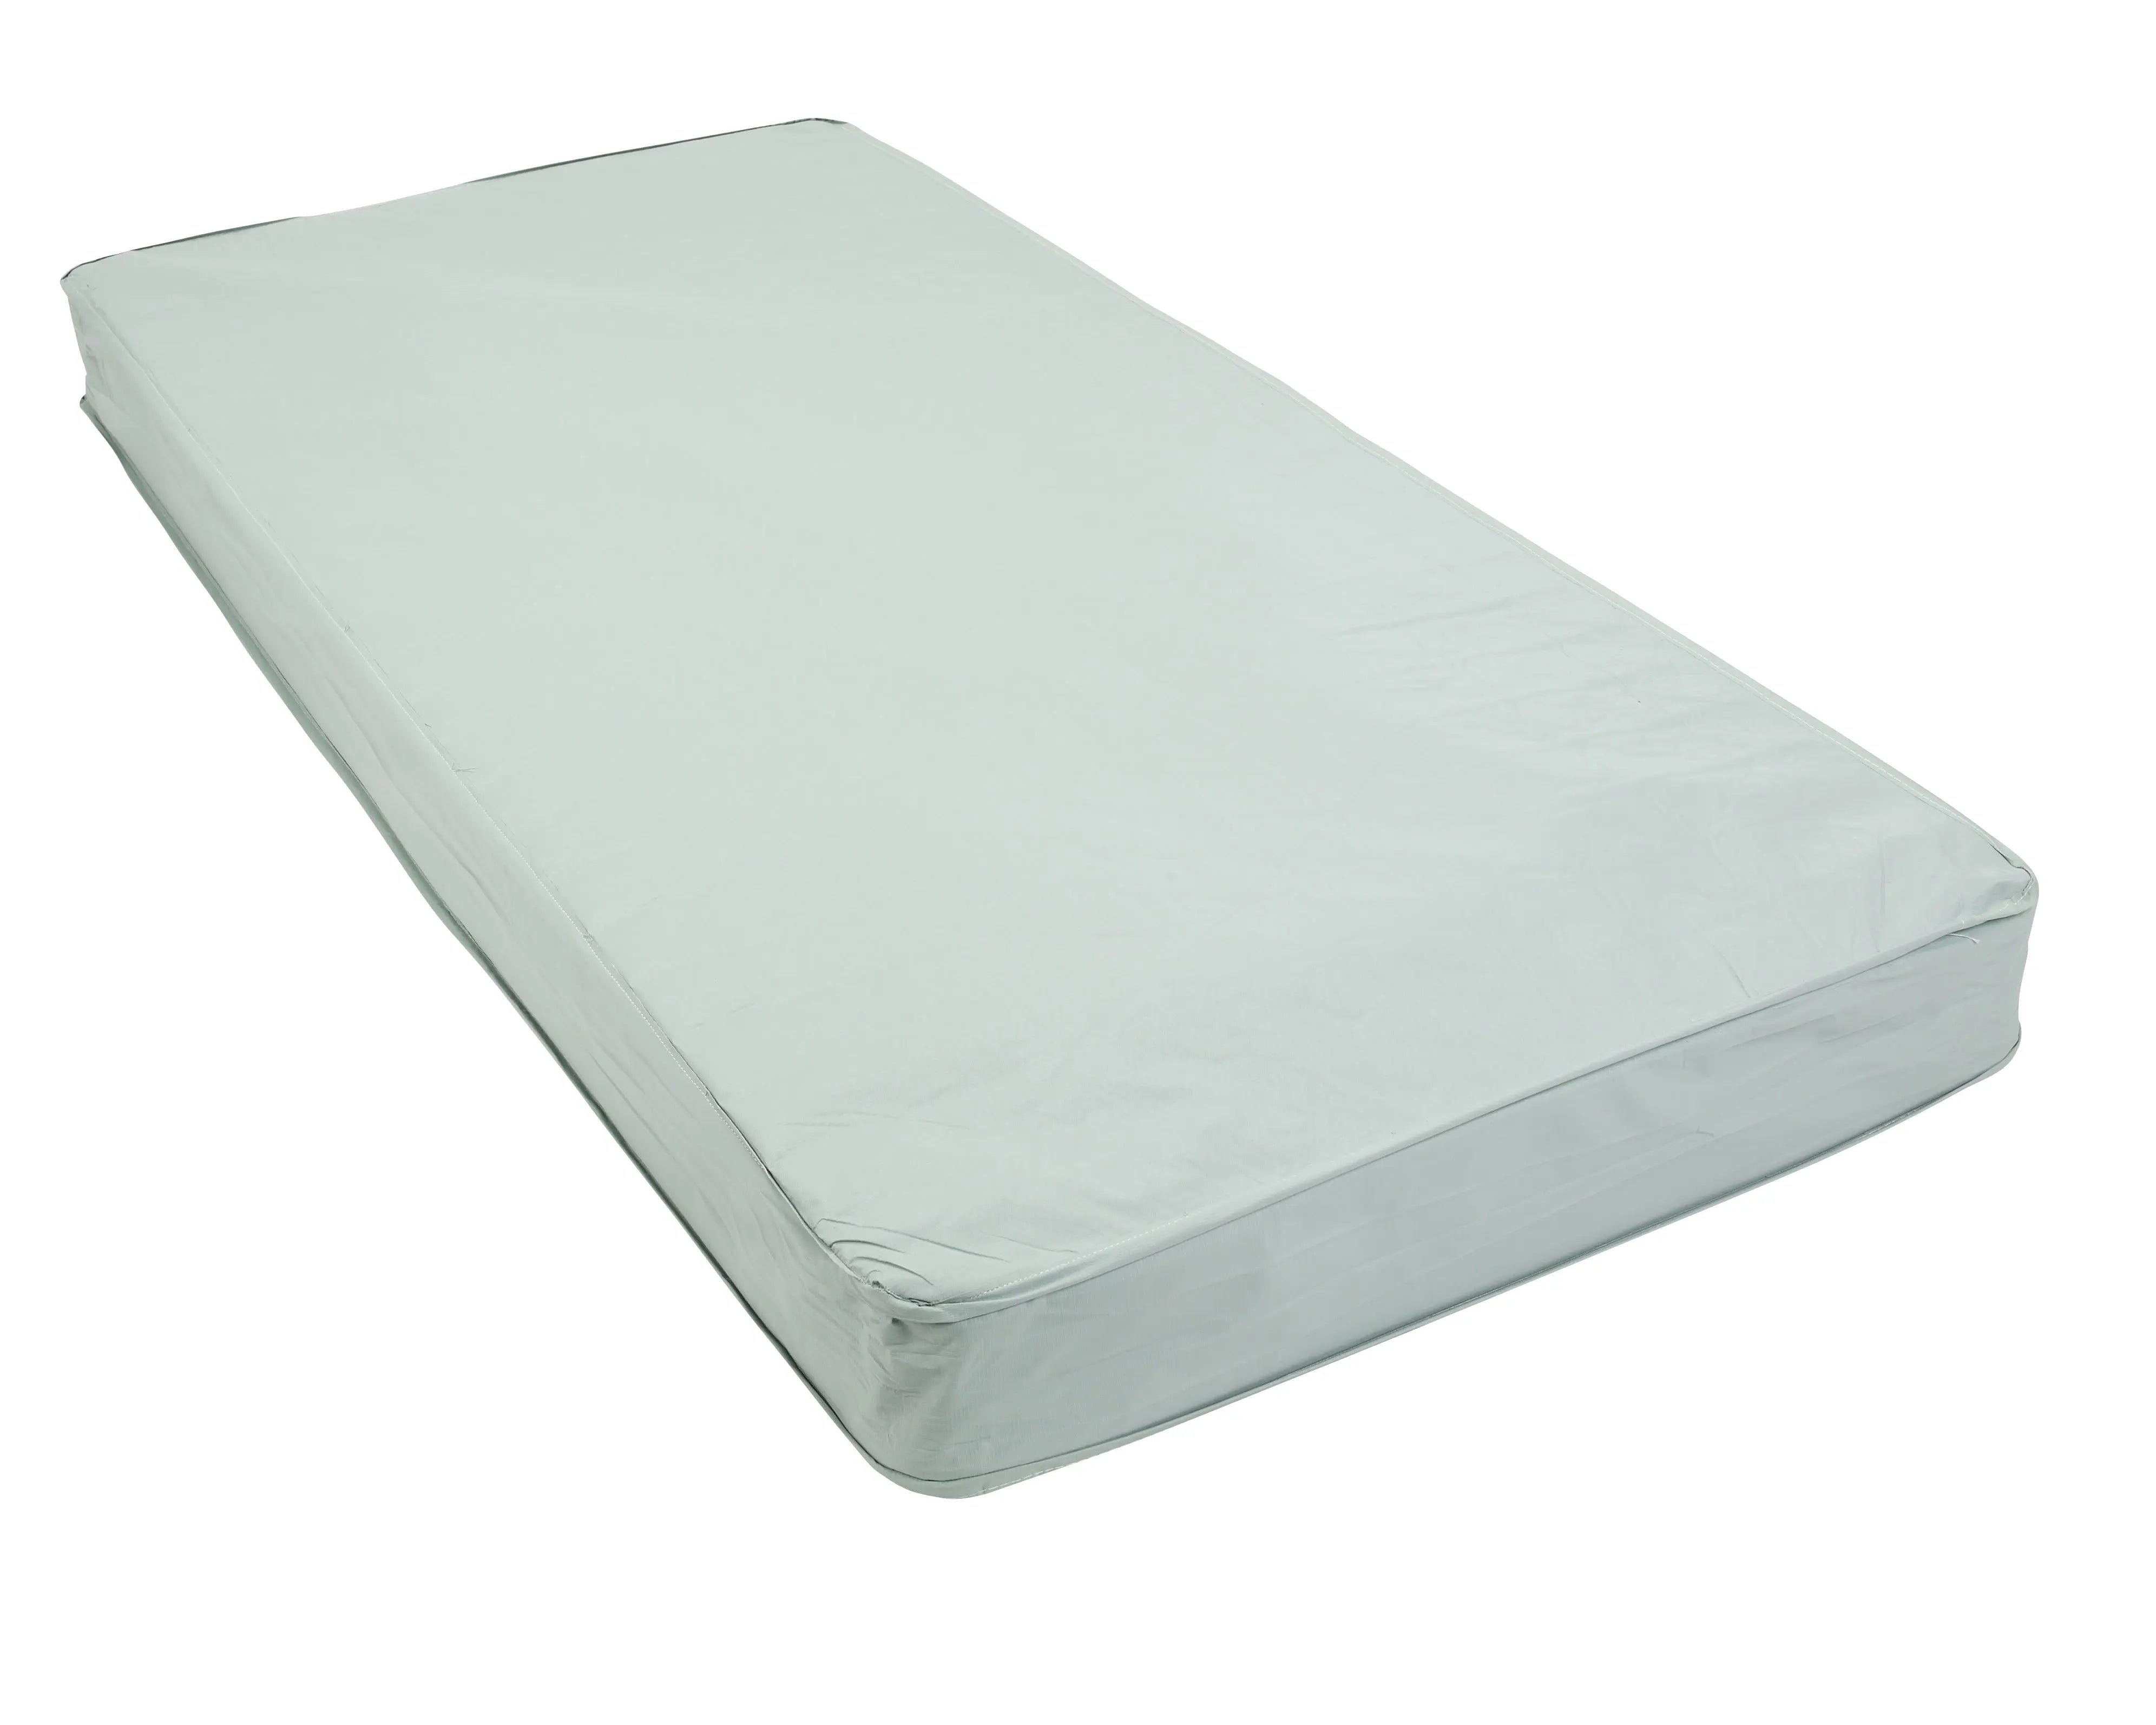 Ortho-Coil Super-Firm Support Innerspring Mattress - Home Health Store Inc